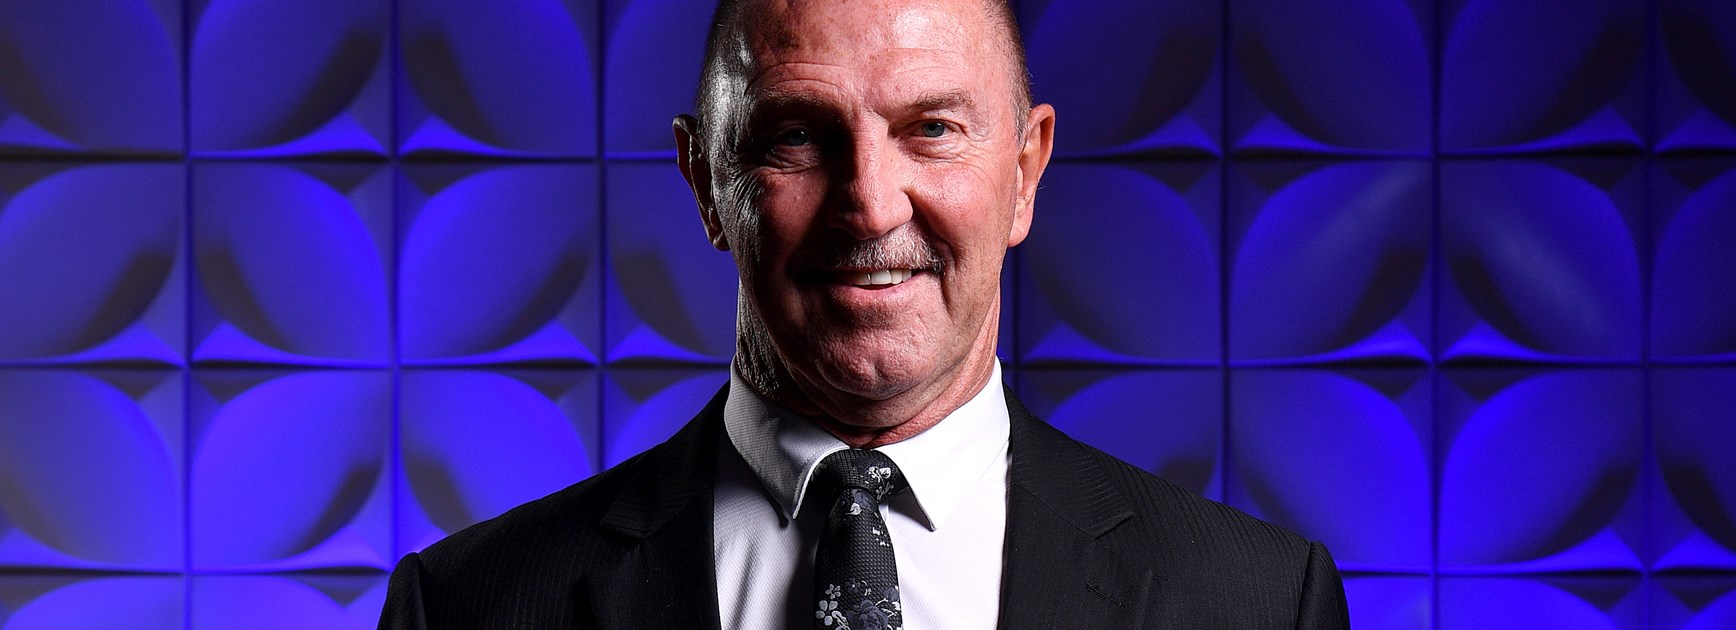 Brett Kenny Inducted into NSWRL Hall of Fame